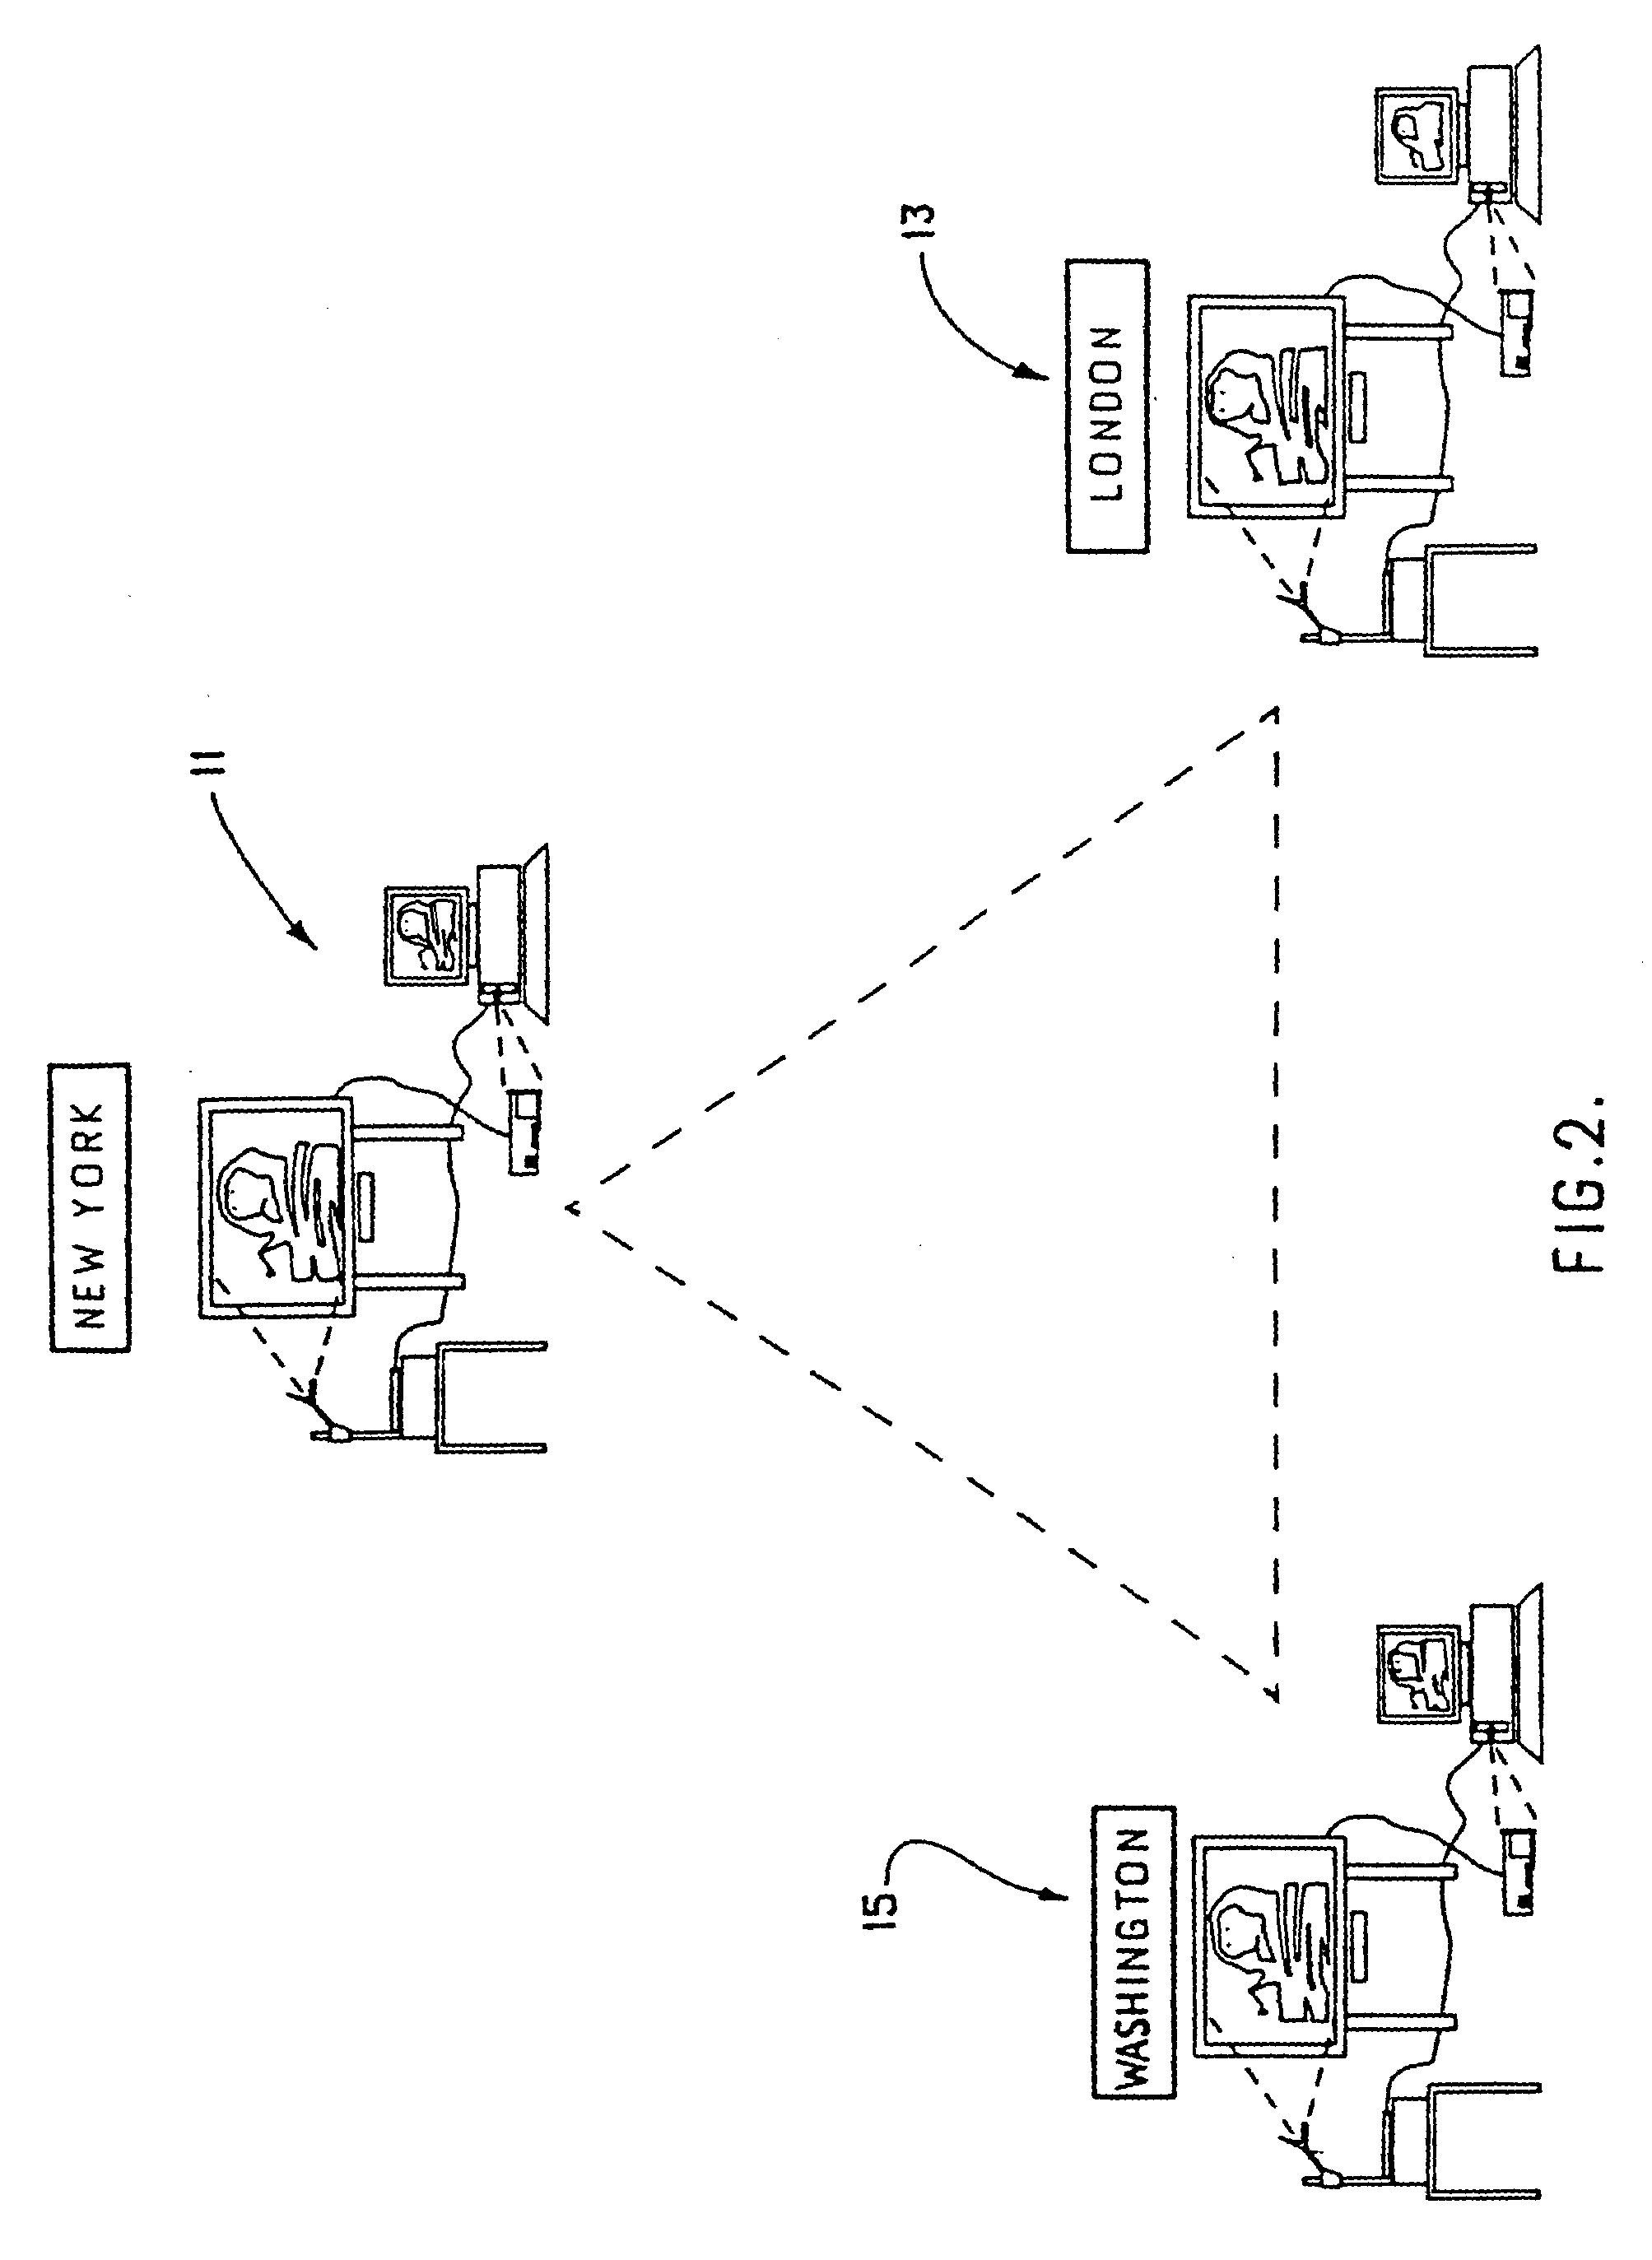 Projection display system with pressure sensing at screen, and computer assisted alignment implemented by applying pressure at displayed calibration marks